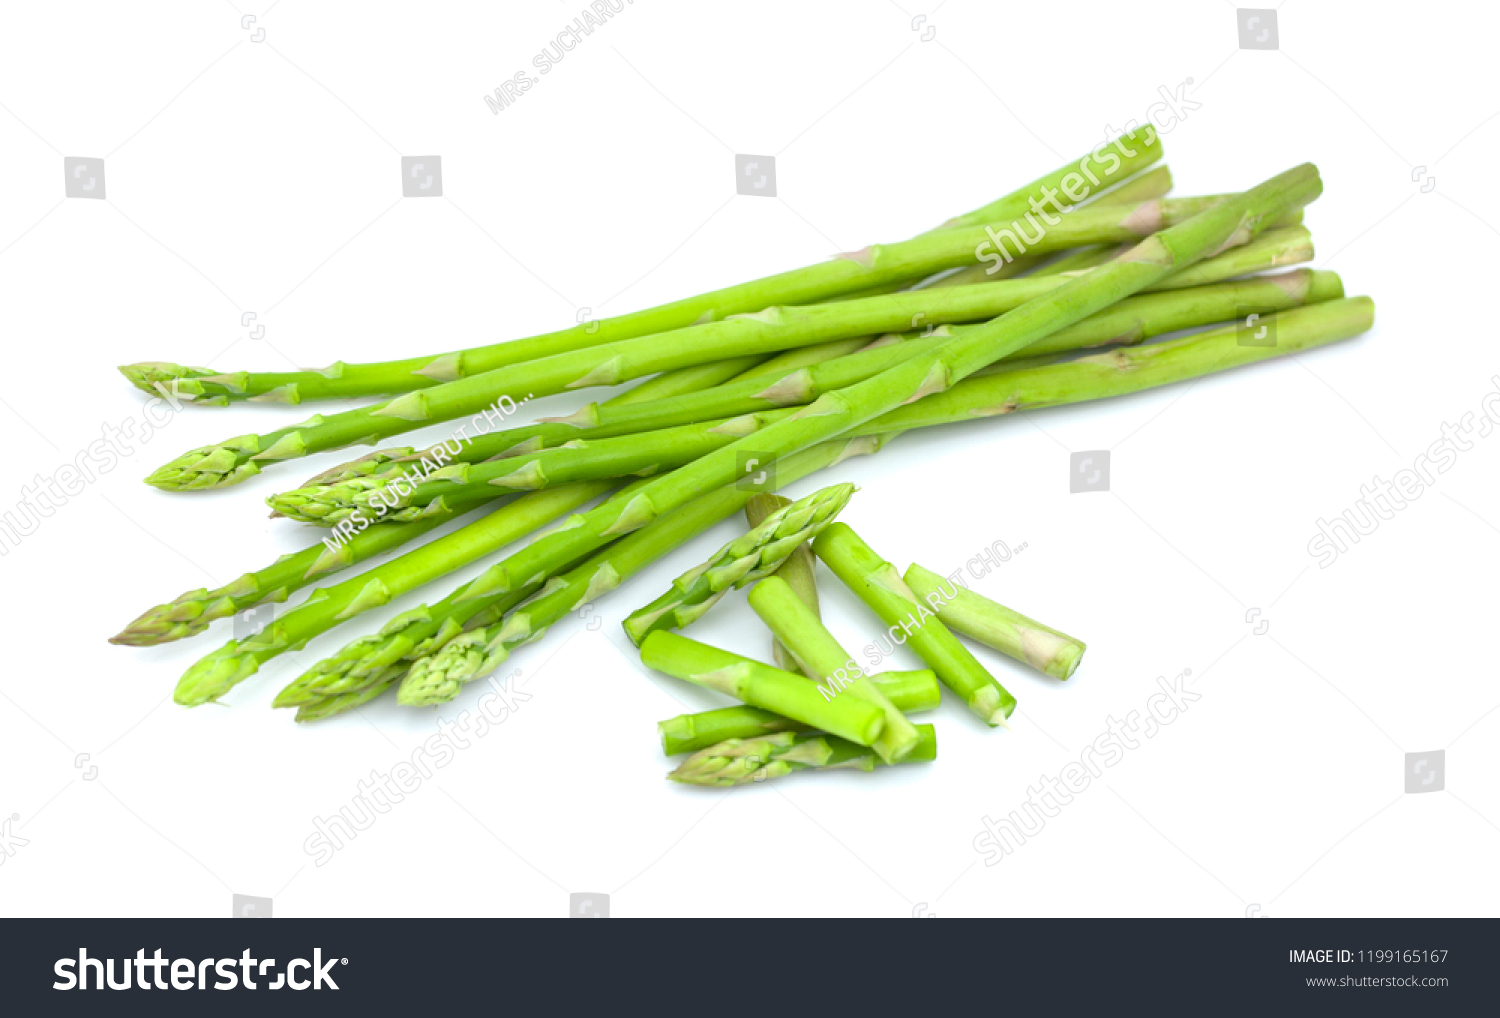 Asparagus isolated on white background #1199165167